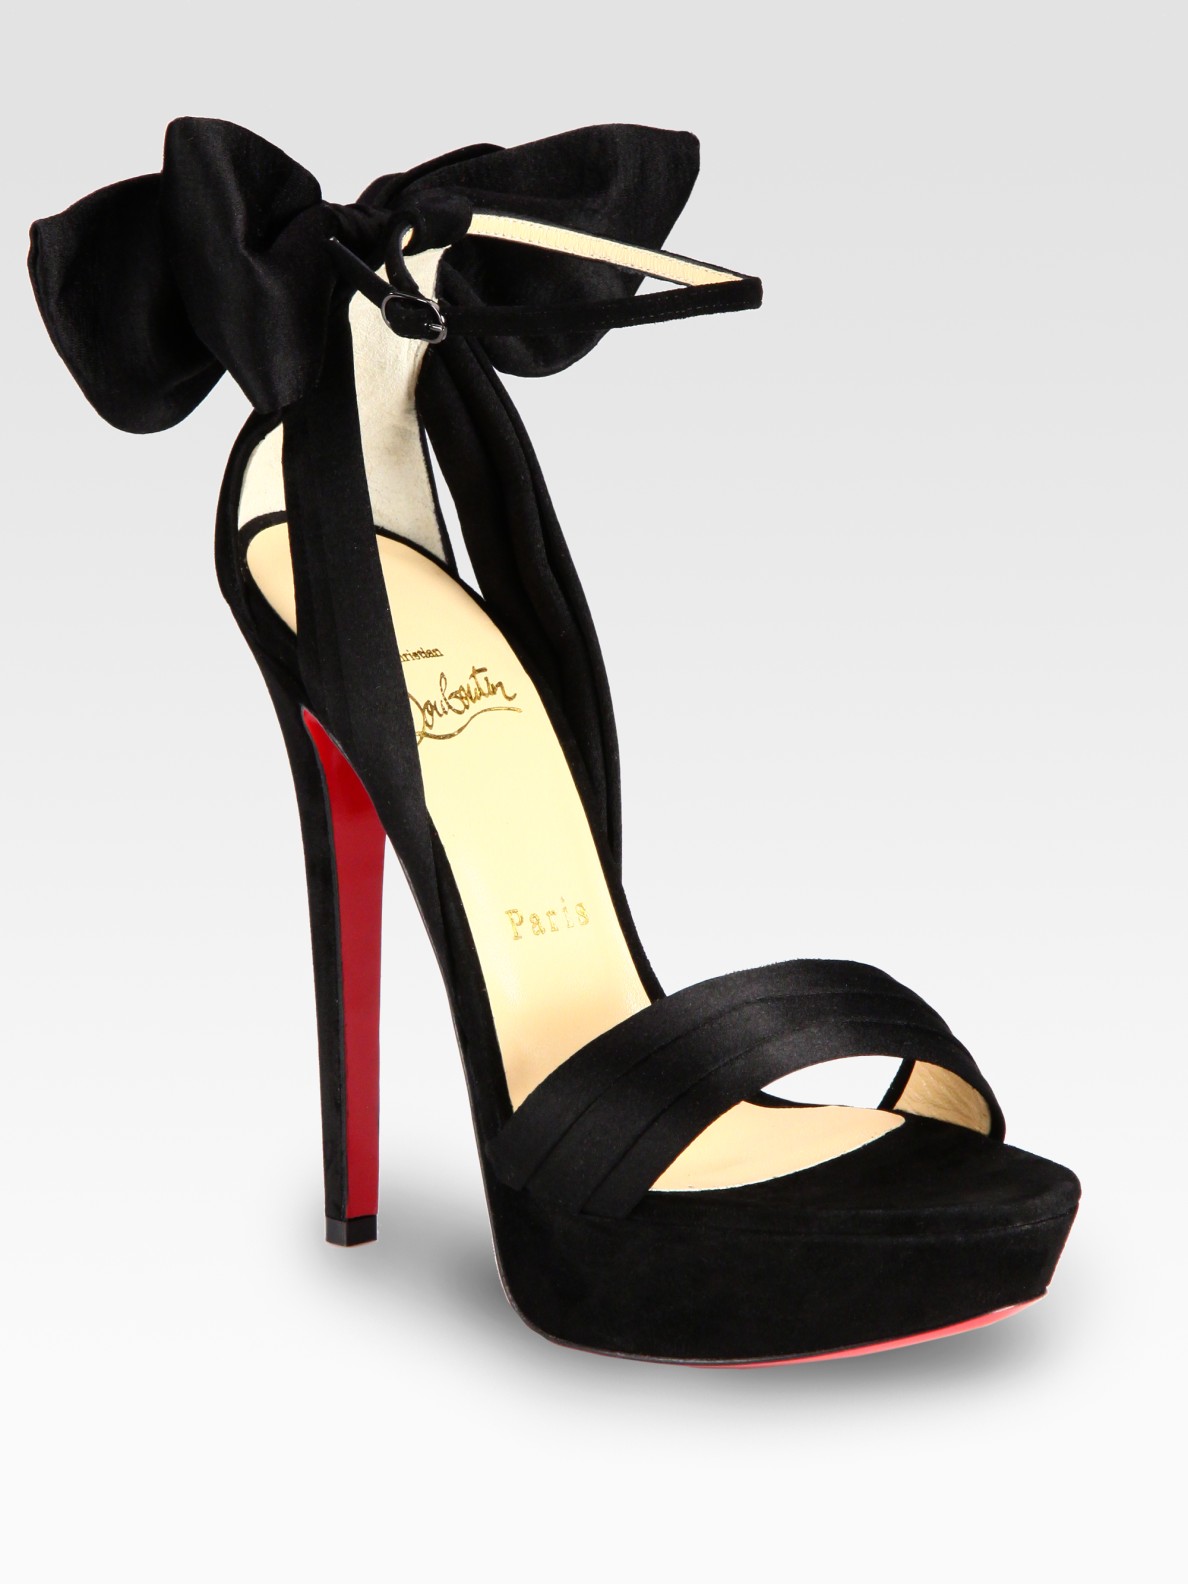 christian louboutin sandals Beige satin bow adornments | The ...